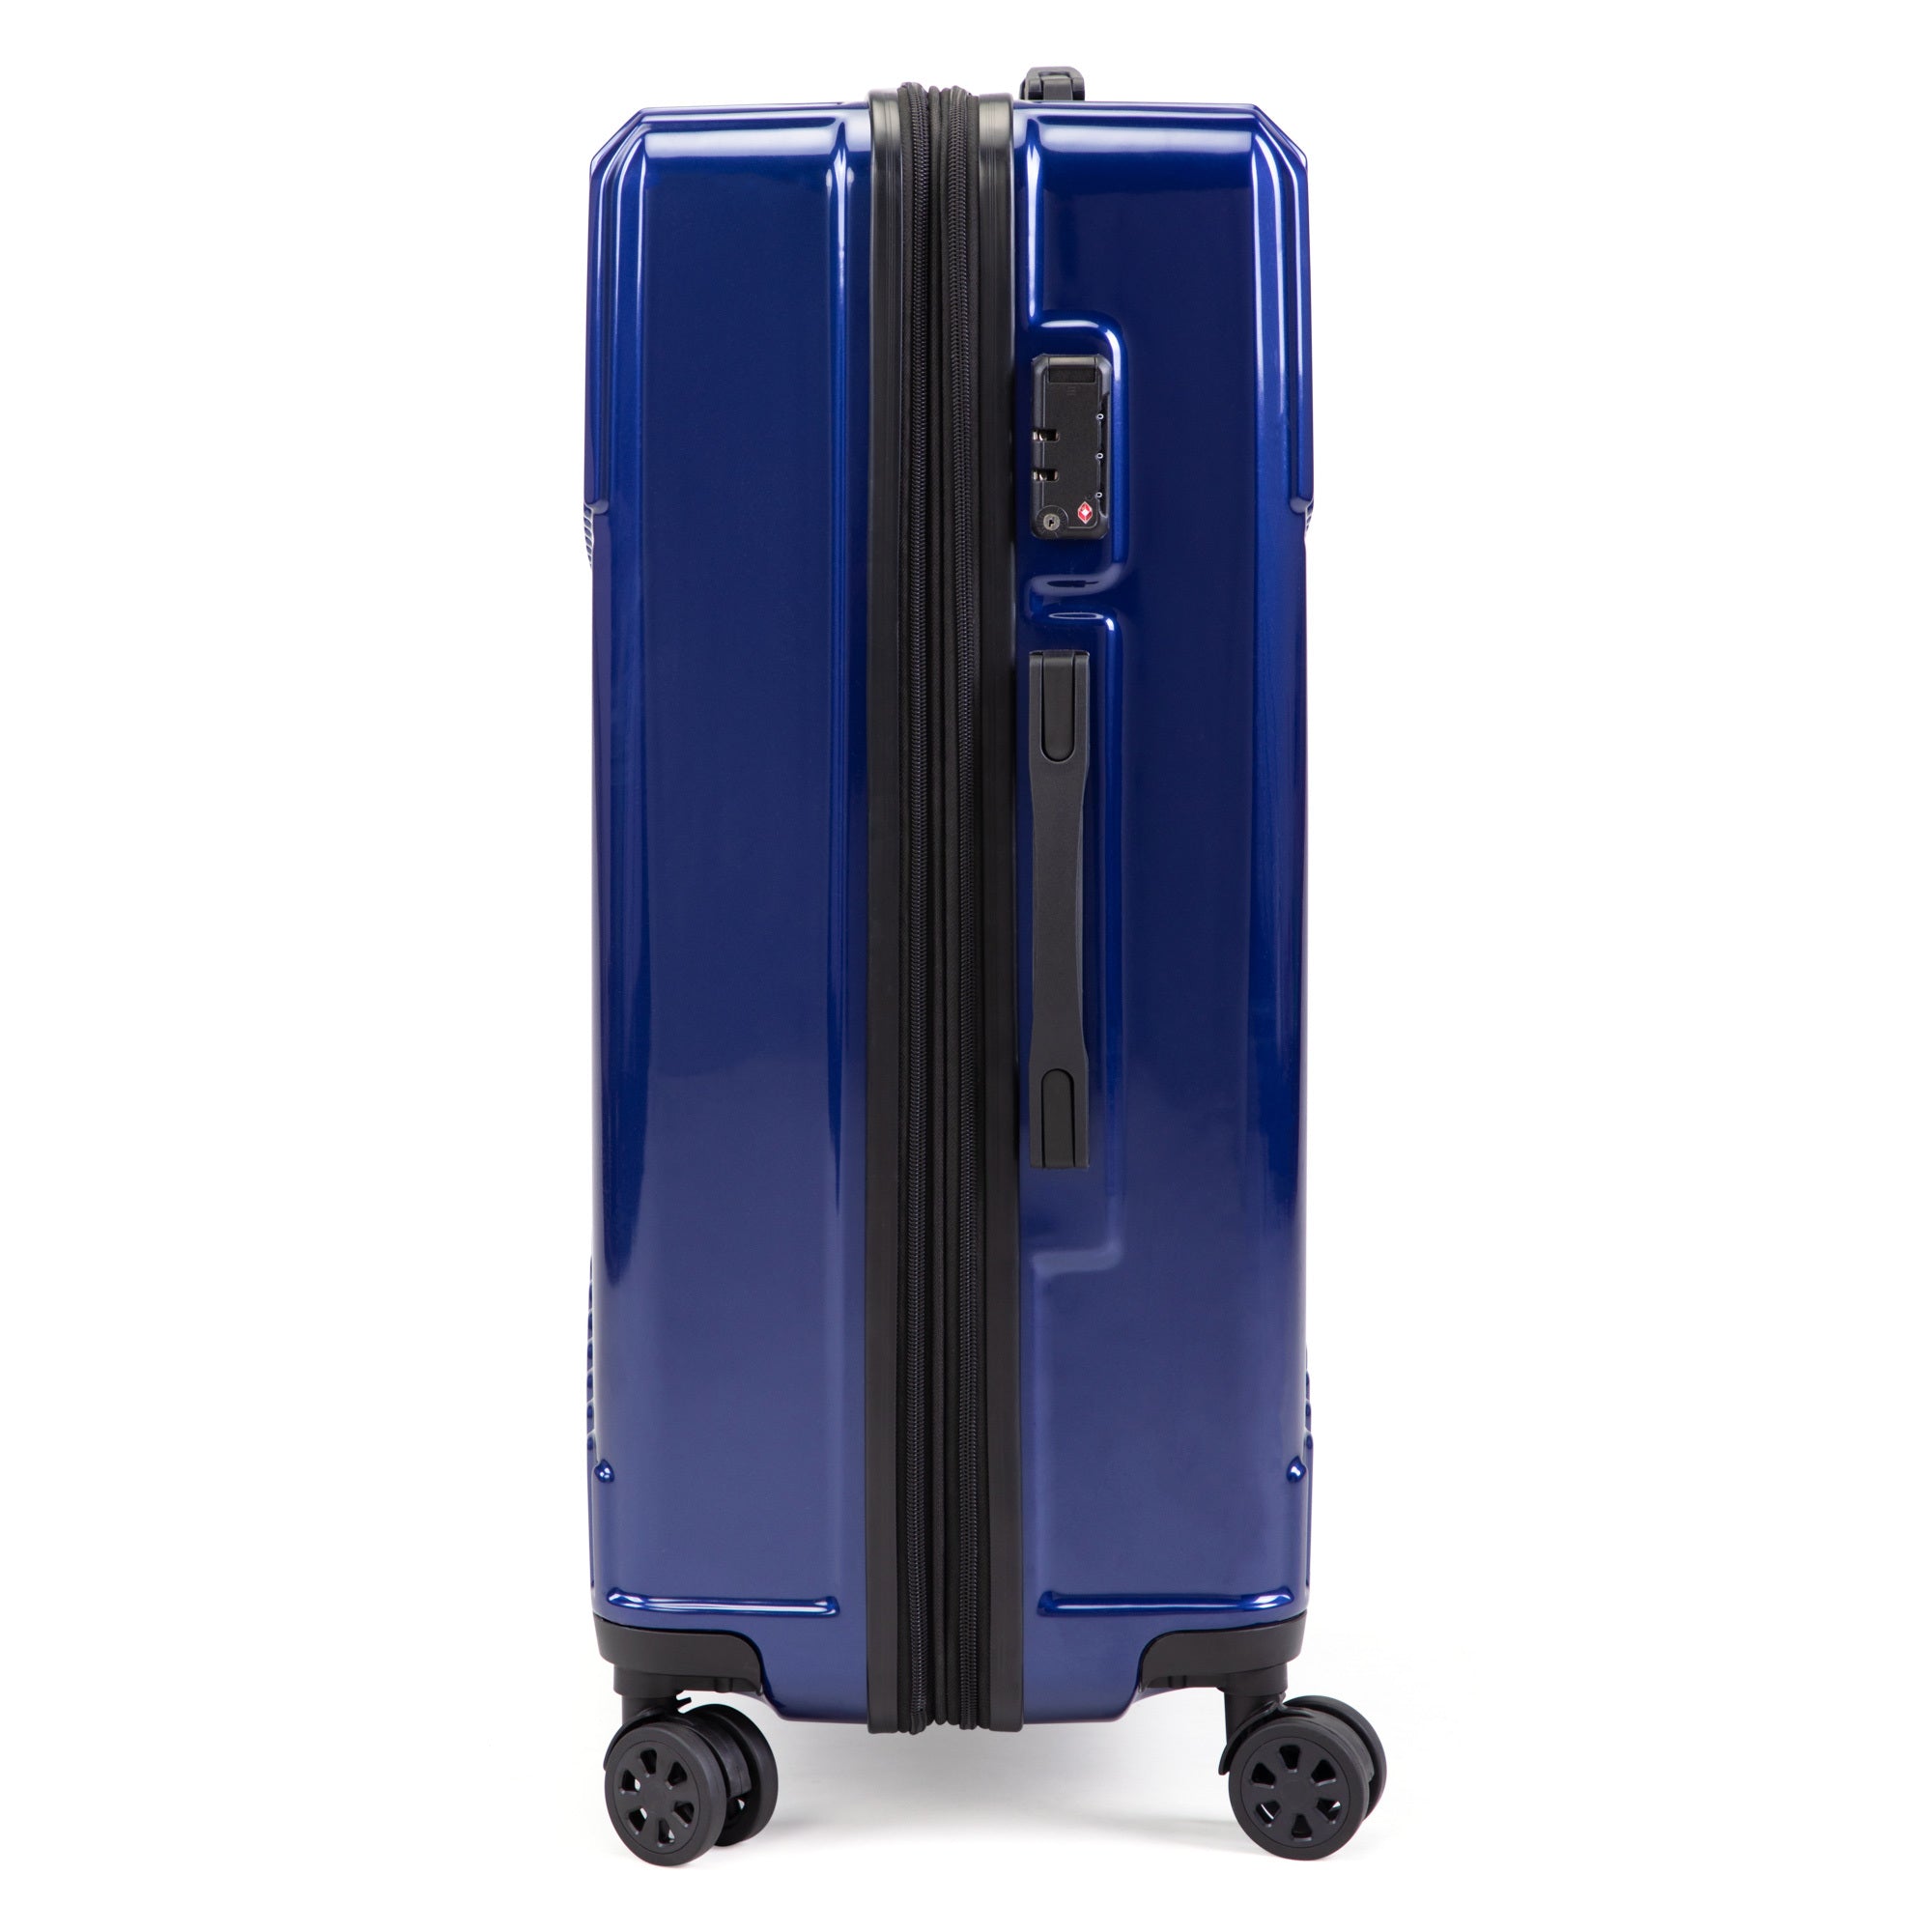 3 Pieces Travel Luggage Set Includes 20 Inches, 24 blue-abs+pc